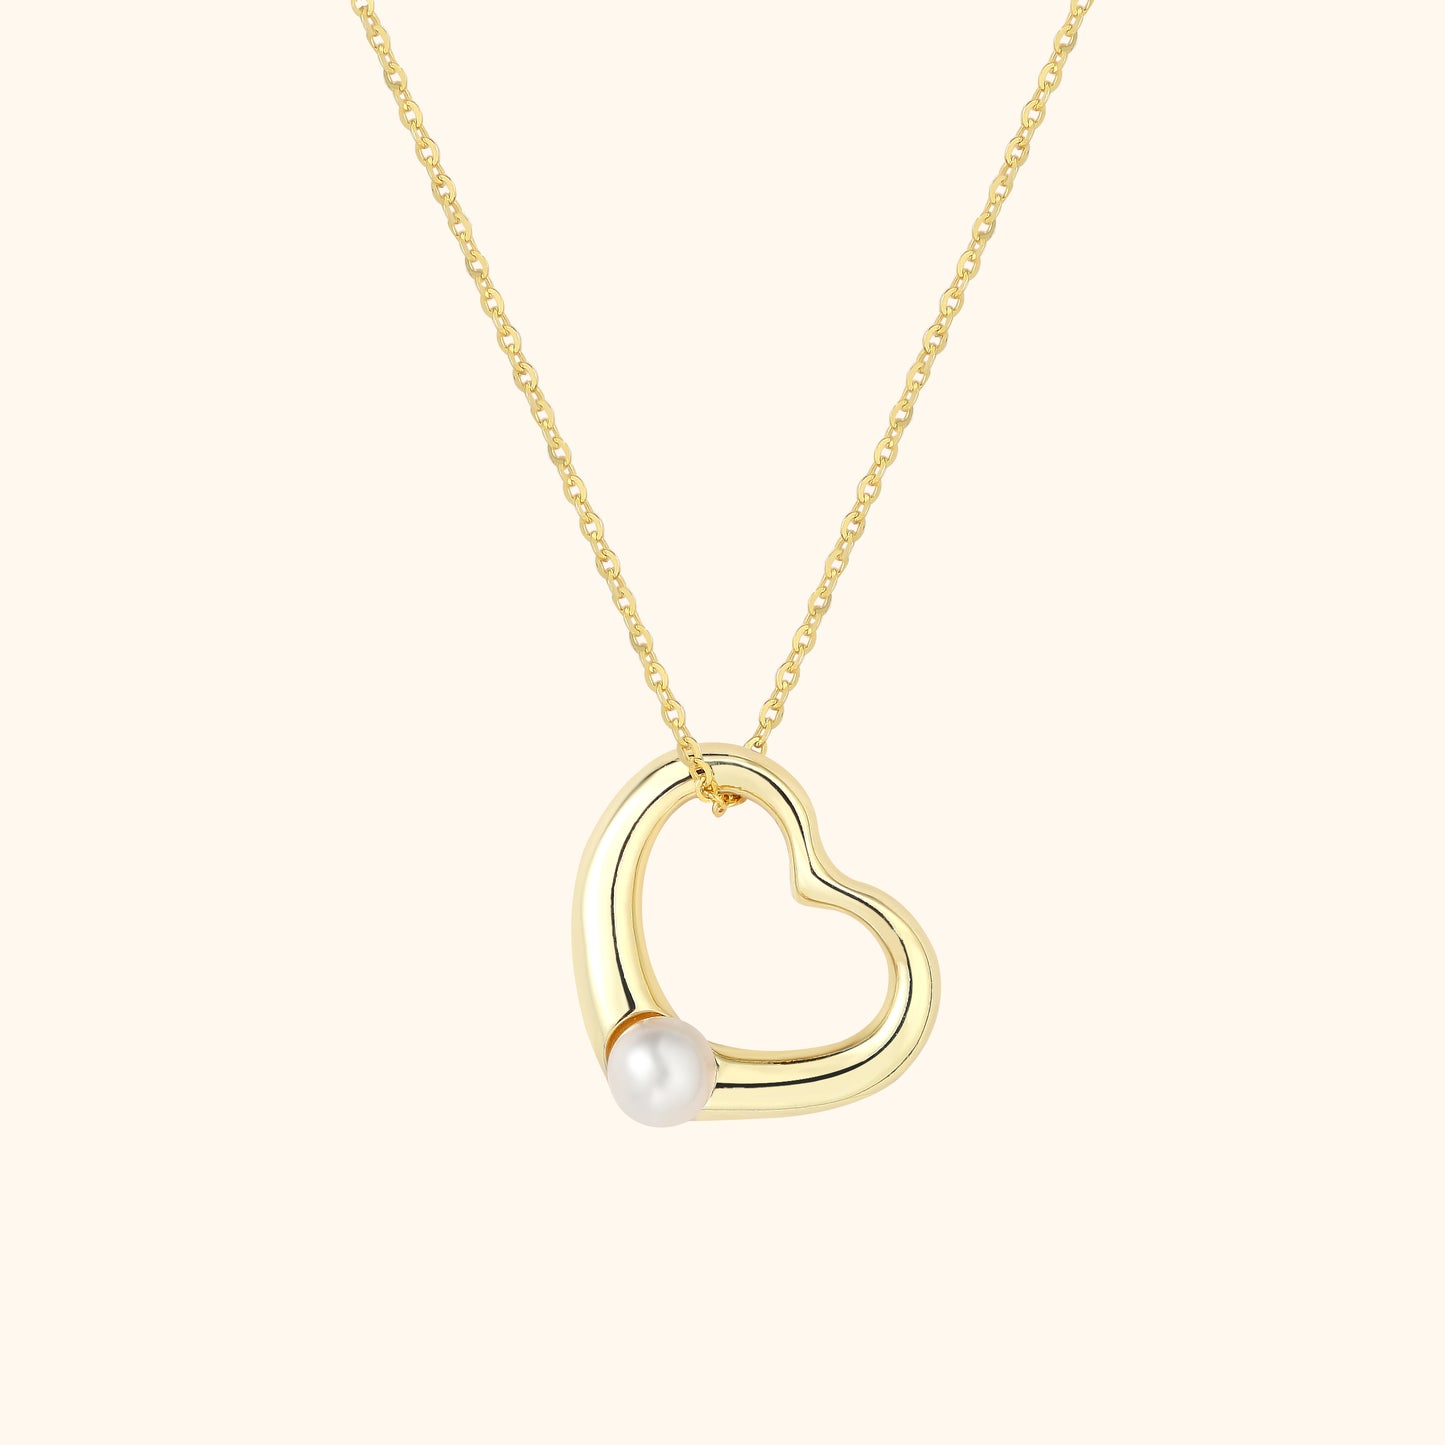 Heart Shaped Pendant Necklace with Freshwater Pearl